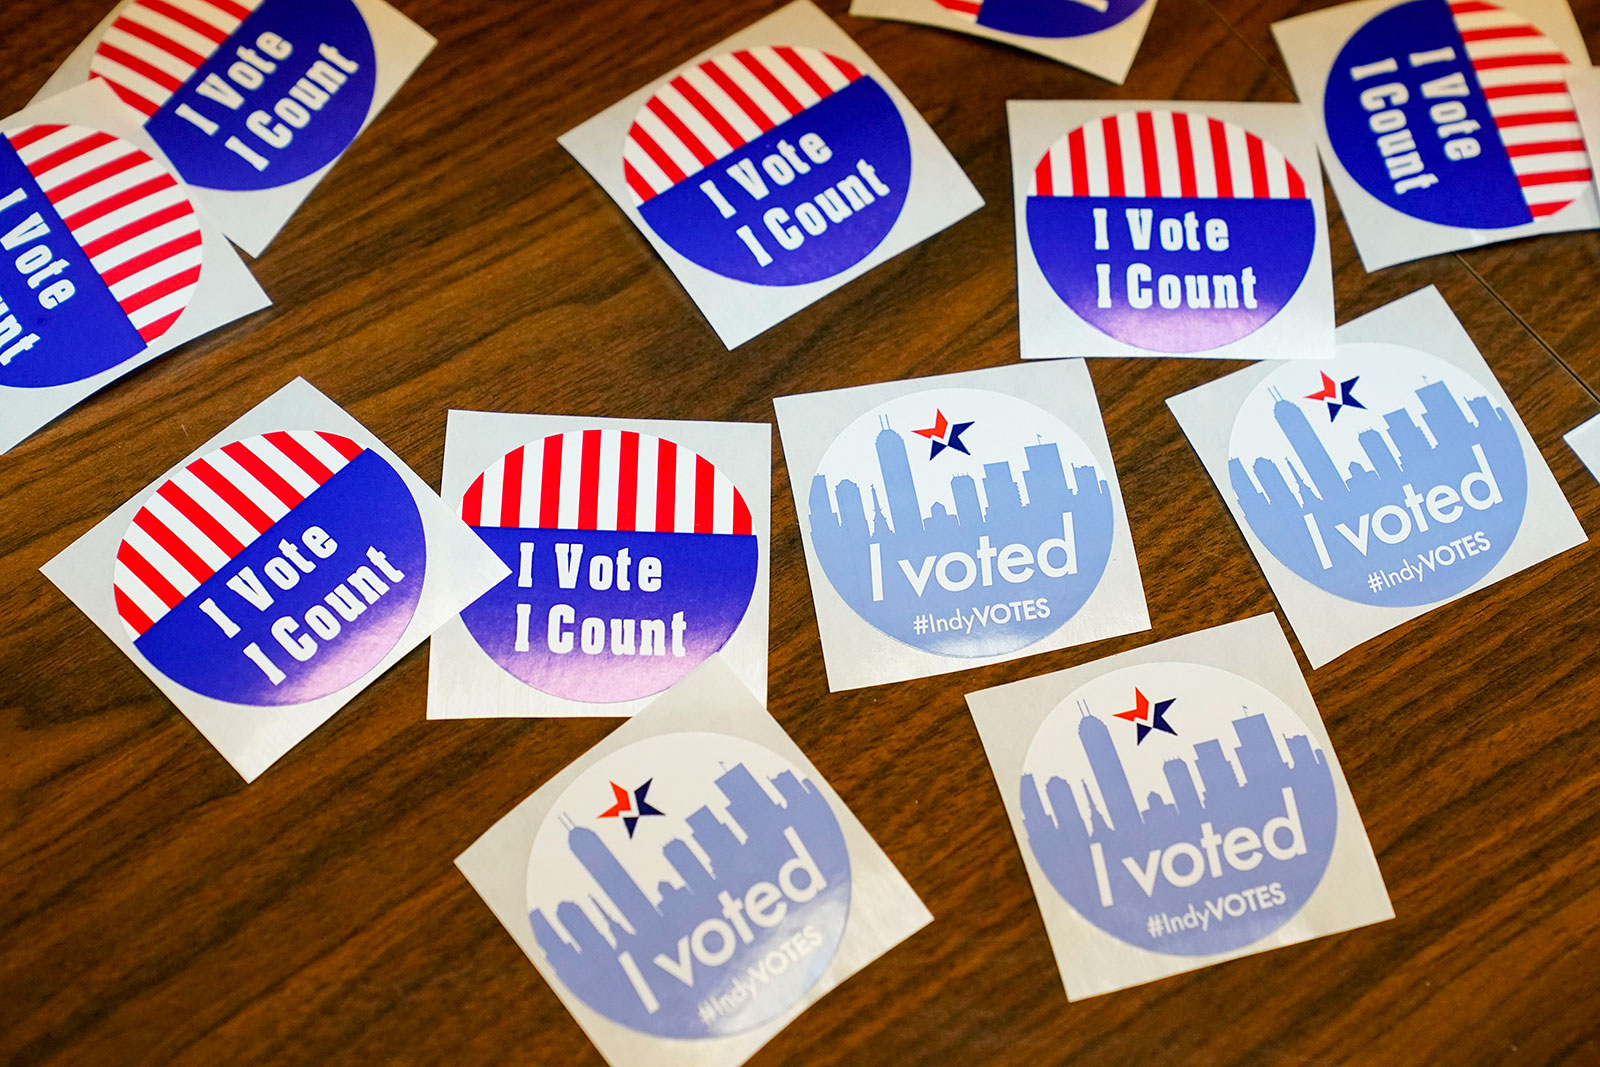 Stickers await voters during primary election voting in Indianapolis, Indiana, on Tuesday, May 3.